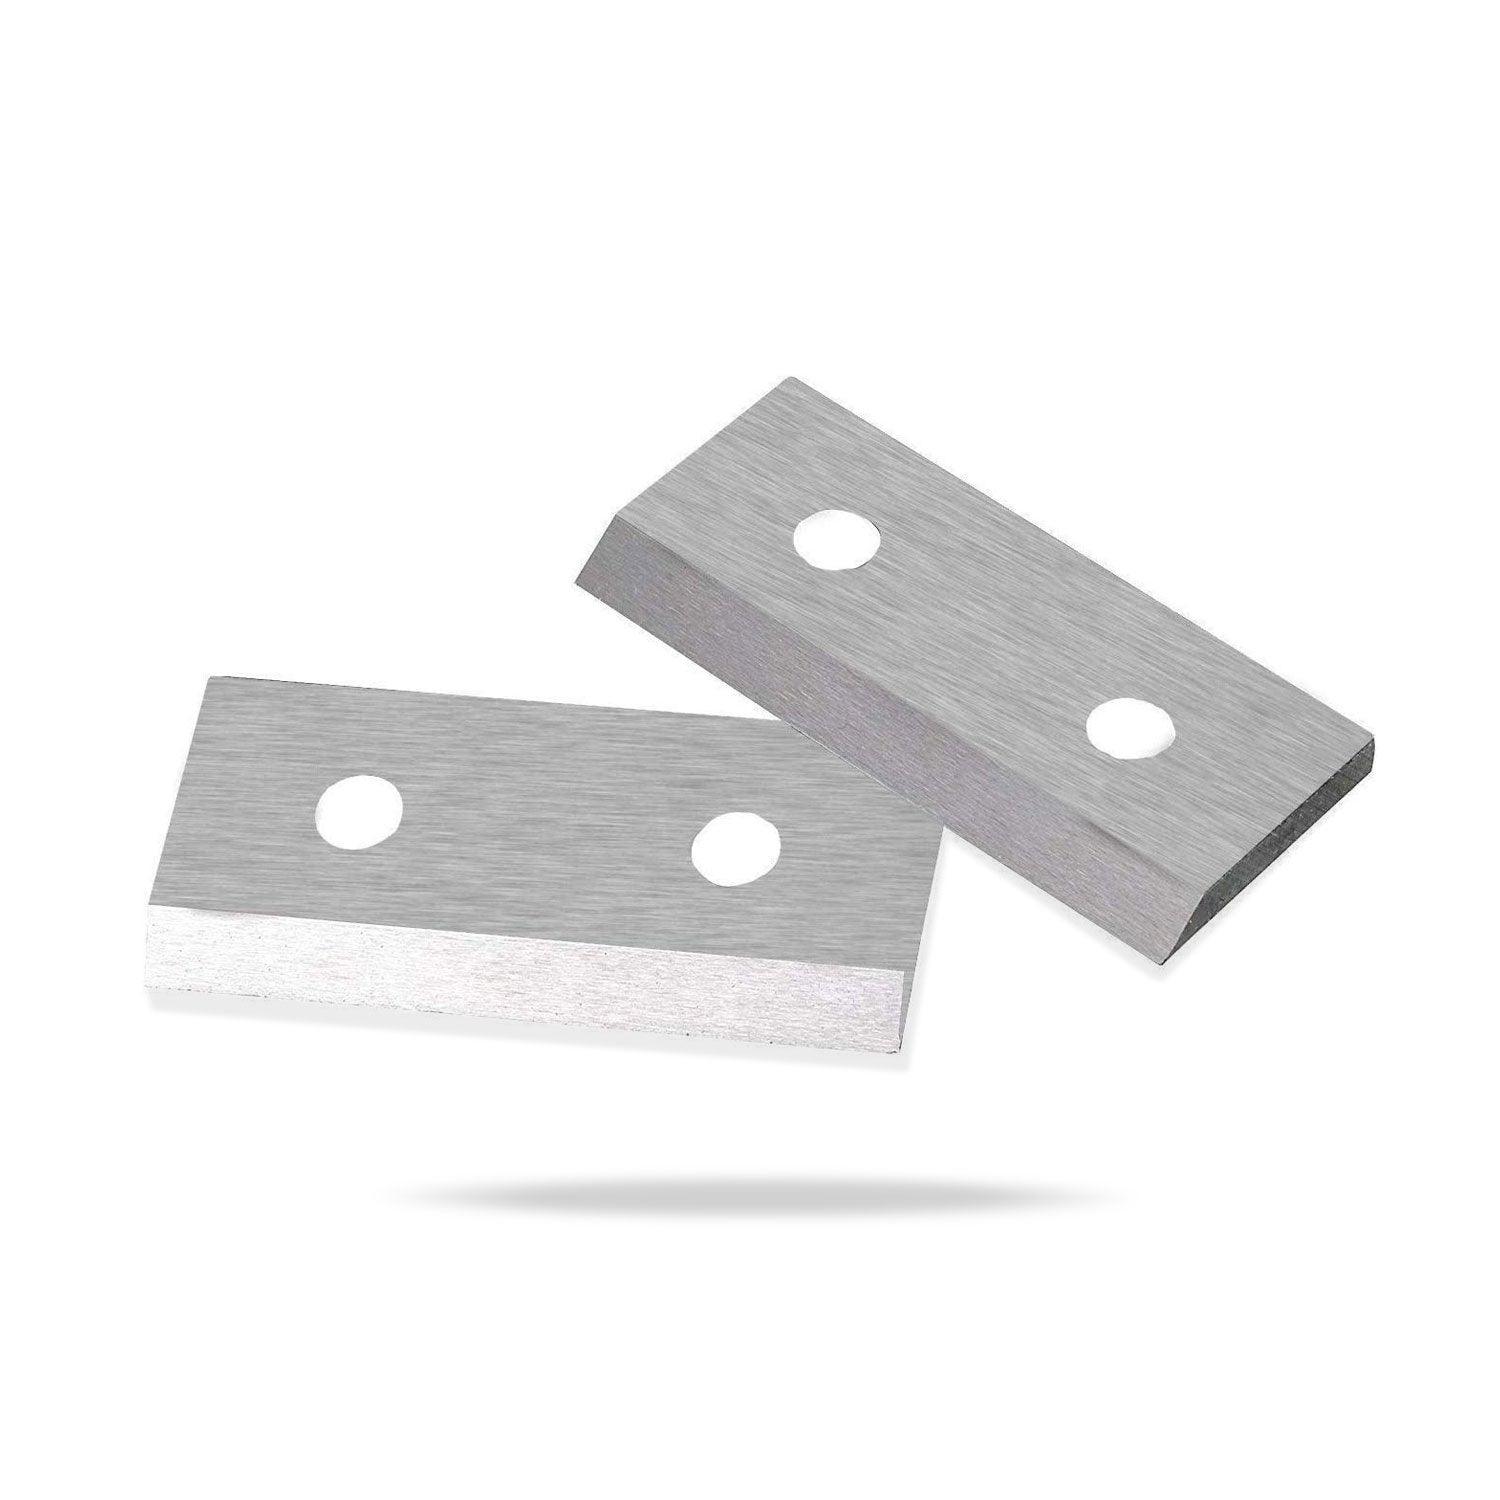 SuperHandy Replacement Wood Chipper Blades - For 3-in-1 Wood Chippers, Fits GUO019 and LCE06 - DIY Tools by GreatCircleUS